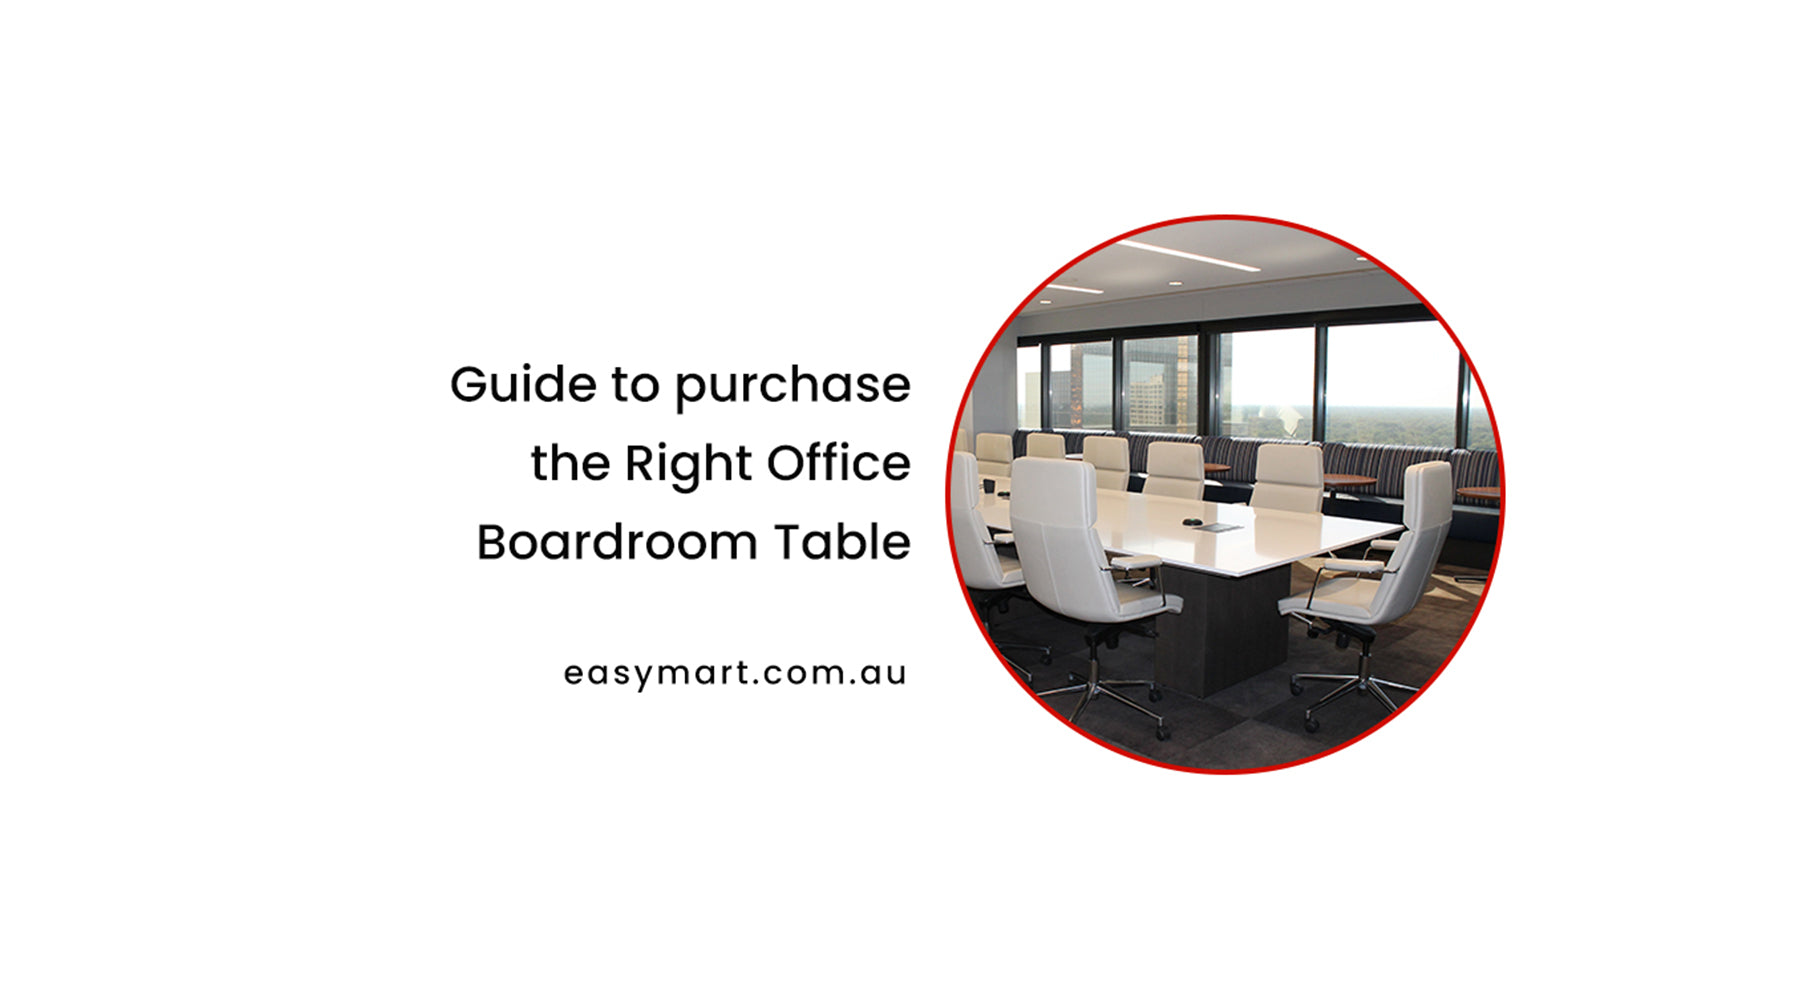 Guide to purchase the Right Office Boardroom Table